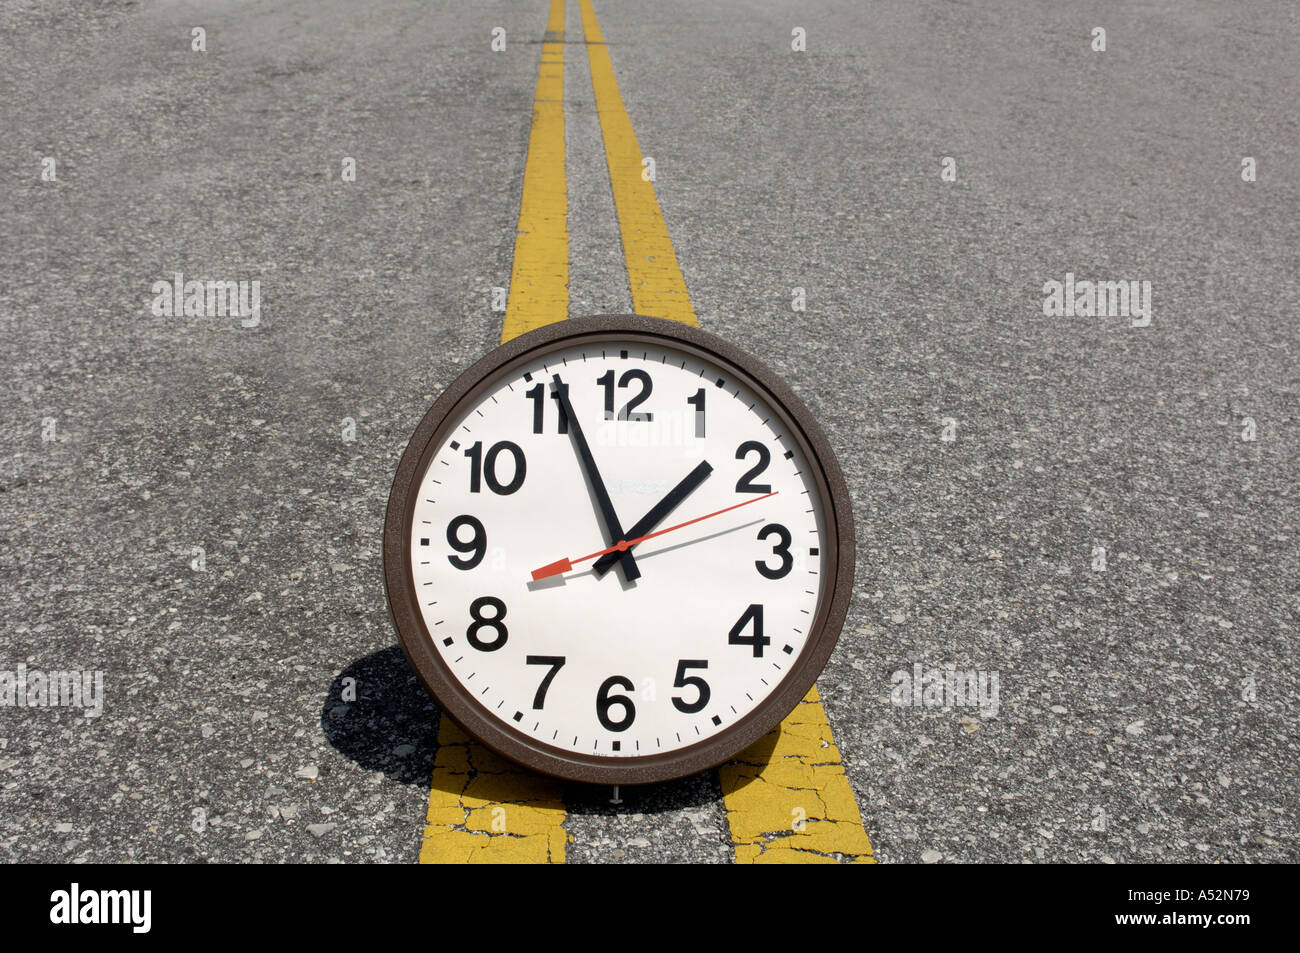 conceptual view of large clock on yellow stripes in roadway Stock Photo